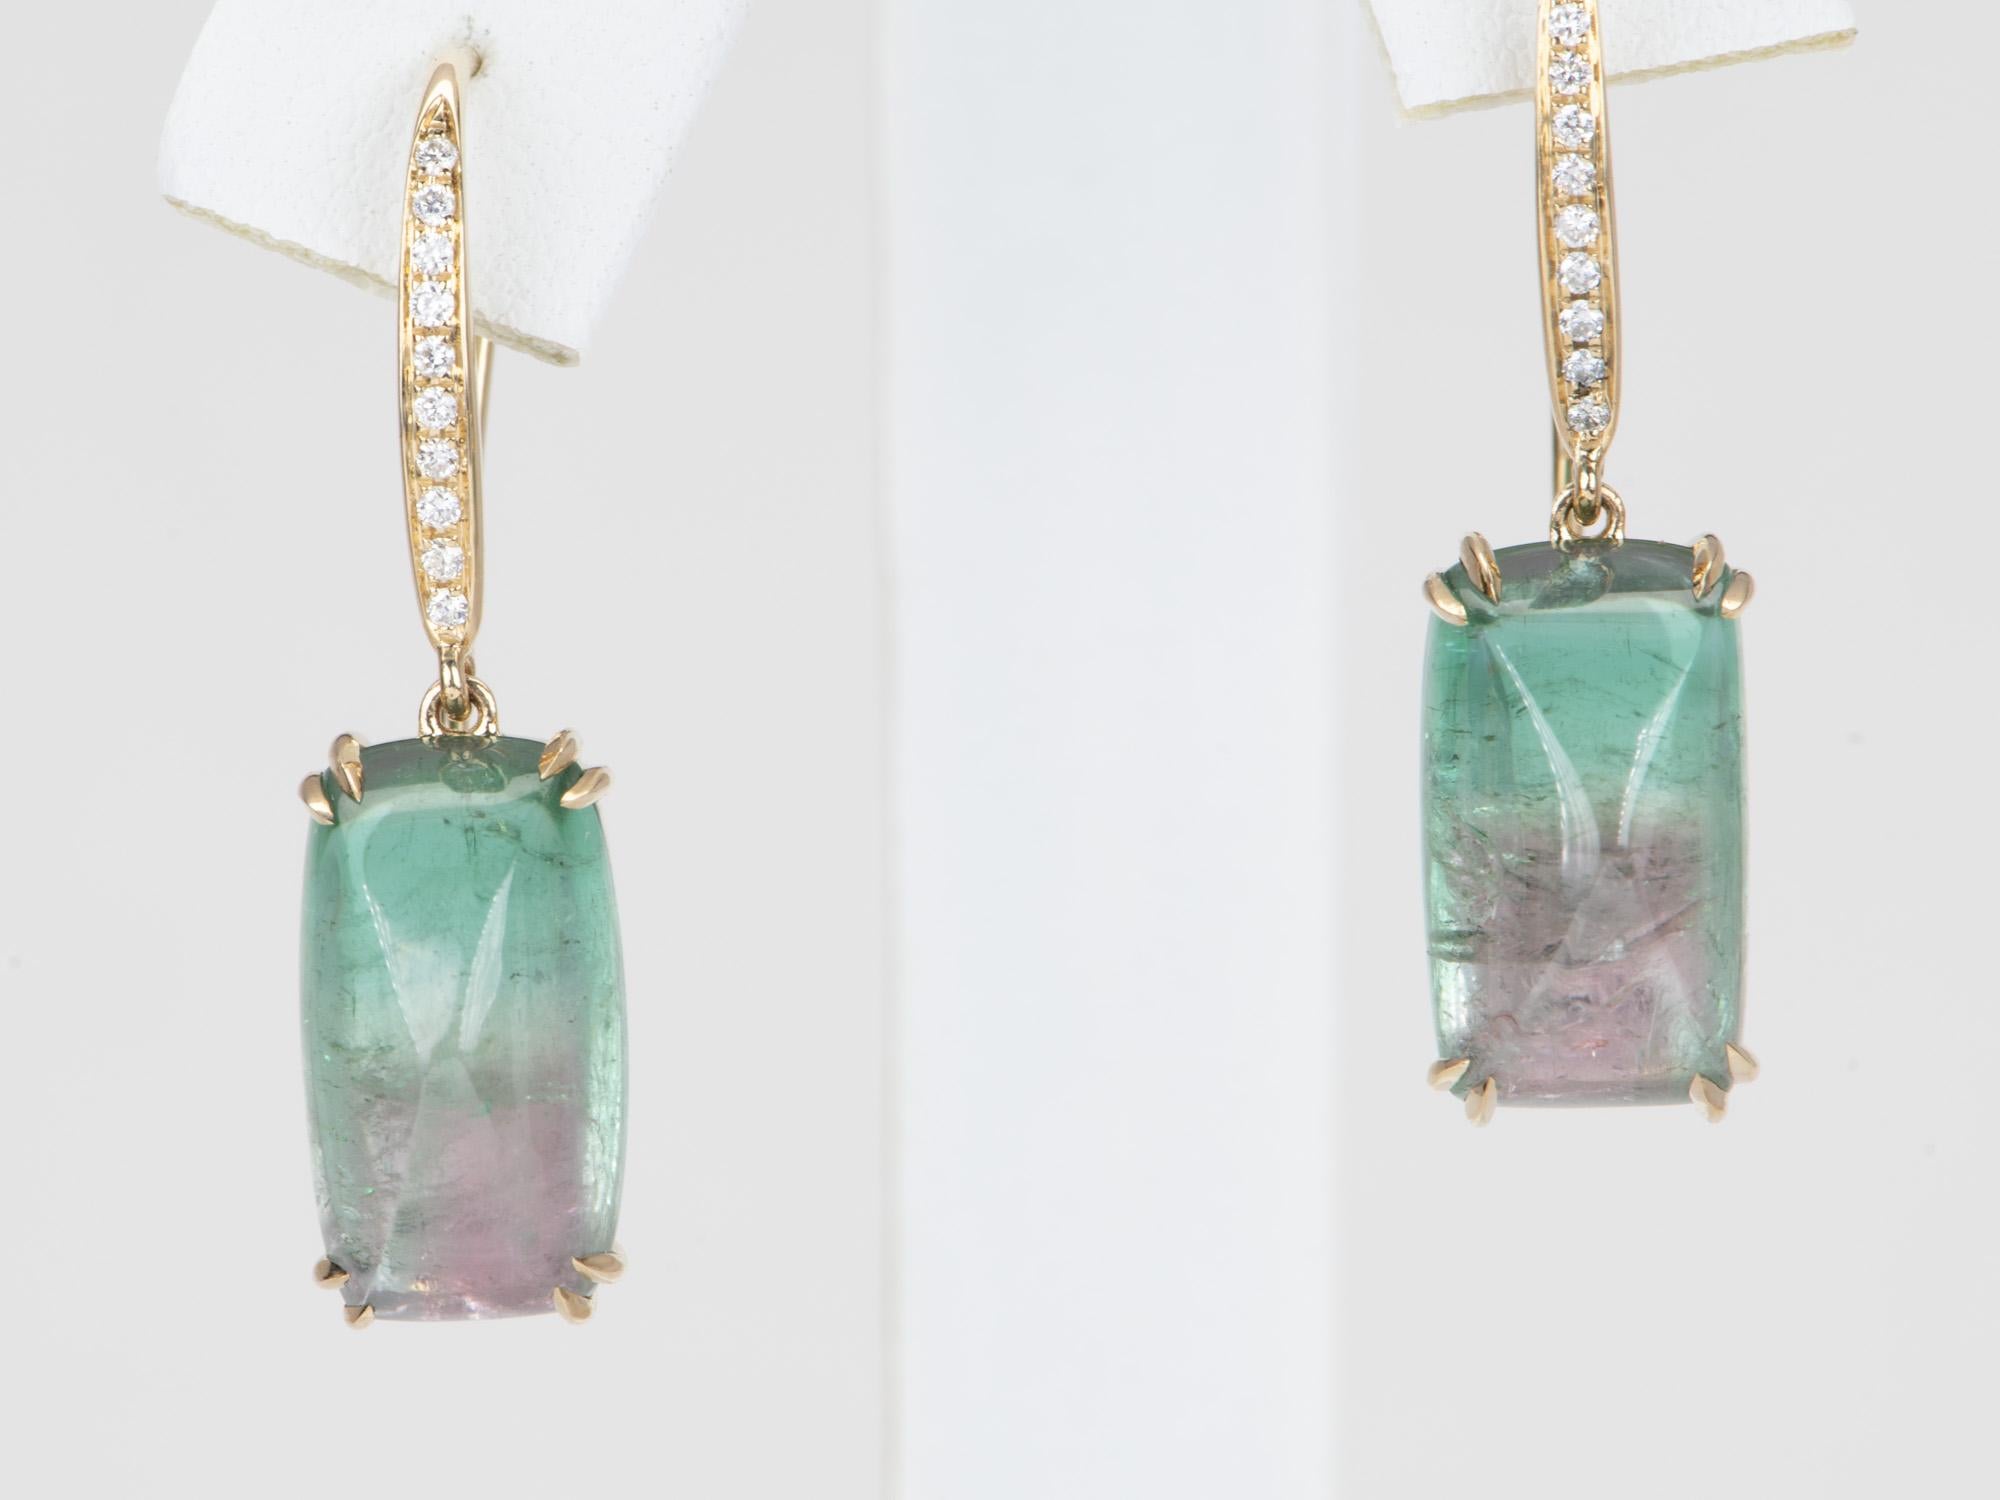 Indulge in the beauty of these Bi-Color Tourmaline Sugarloaf Dangle Earrings. Crafted with transparent and vibrant tourmaline crystals with a striking bi-color effect, they will be sure to draw compliments! A perfect choice to make a statement, made